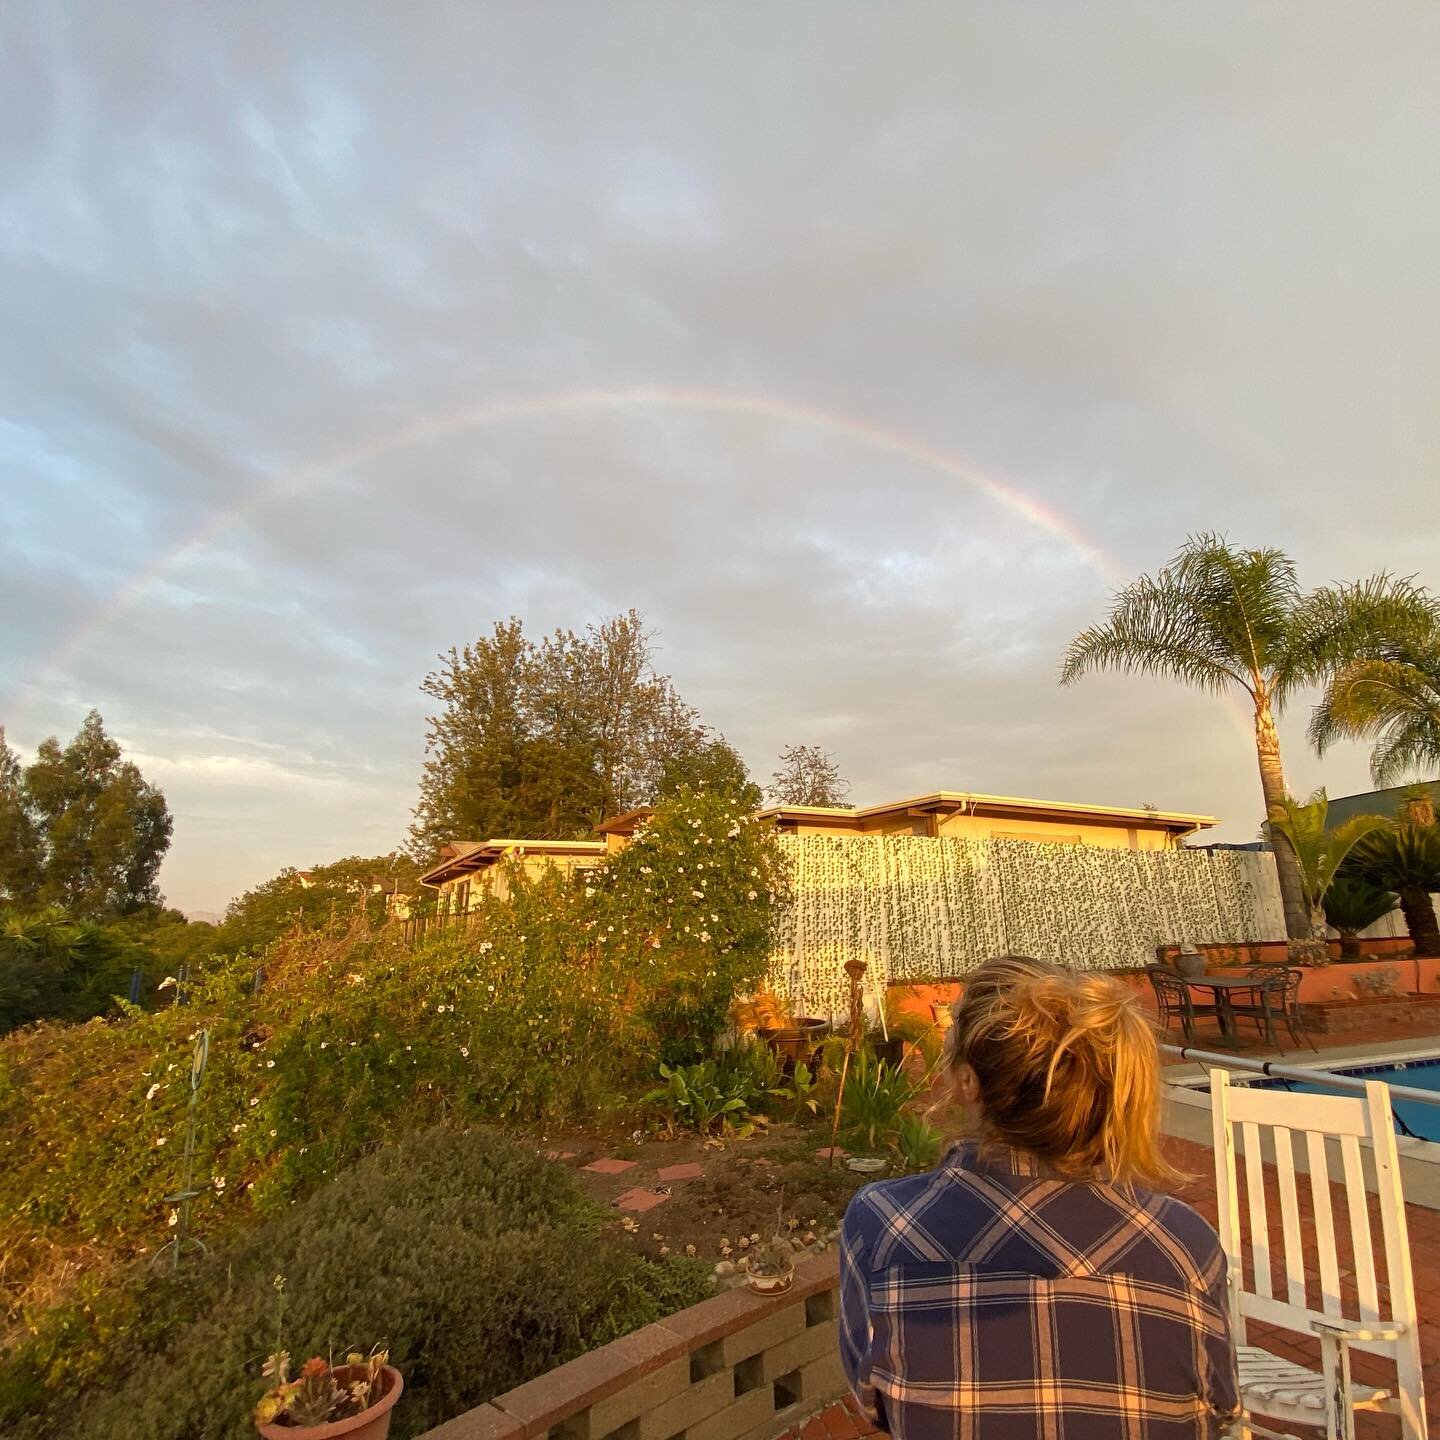 🌈A little gift from spirit yesterday evening after the rain. #chakrahealing 

Embodying the beautiful presence of a rainbow 🌈 

▫️Life
▫️Hope
▫️Divinity
▫️Promise
▫️Creation
▫️Initiation
▫️Potential
▫️Harmony
▫️Expansion
▫️Ascension
▫️Spirituality
